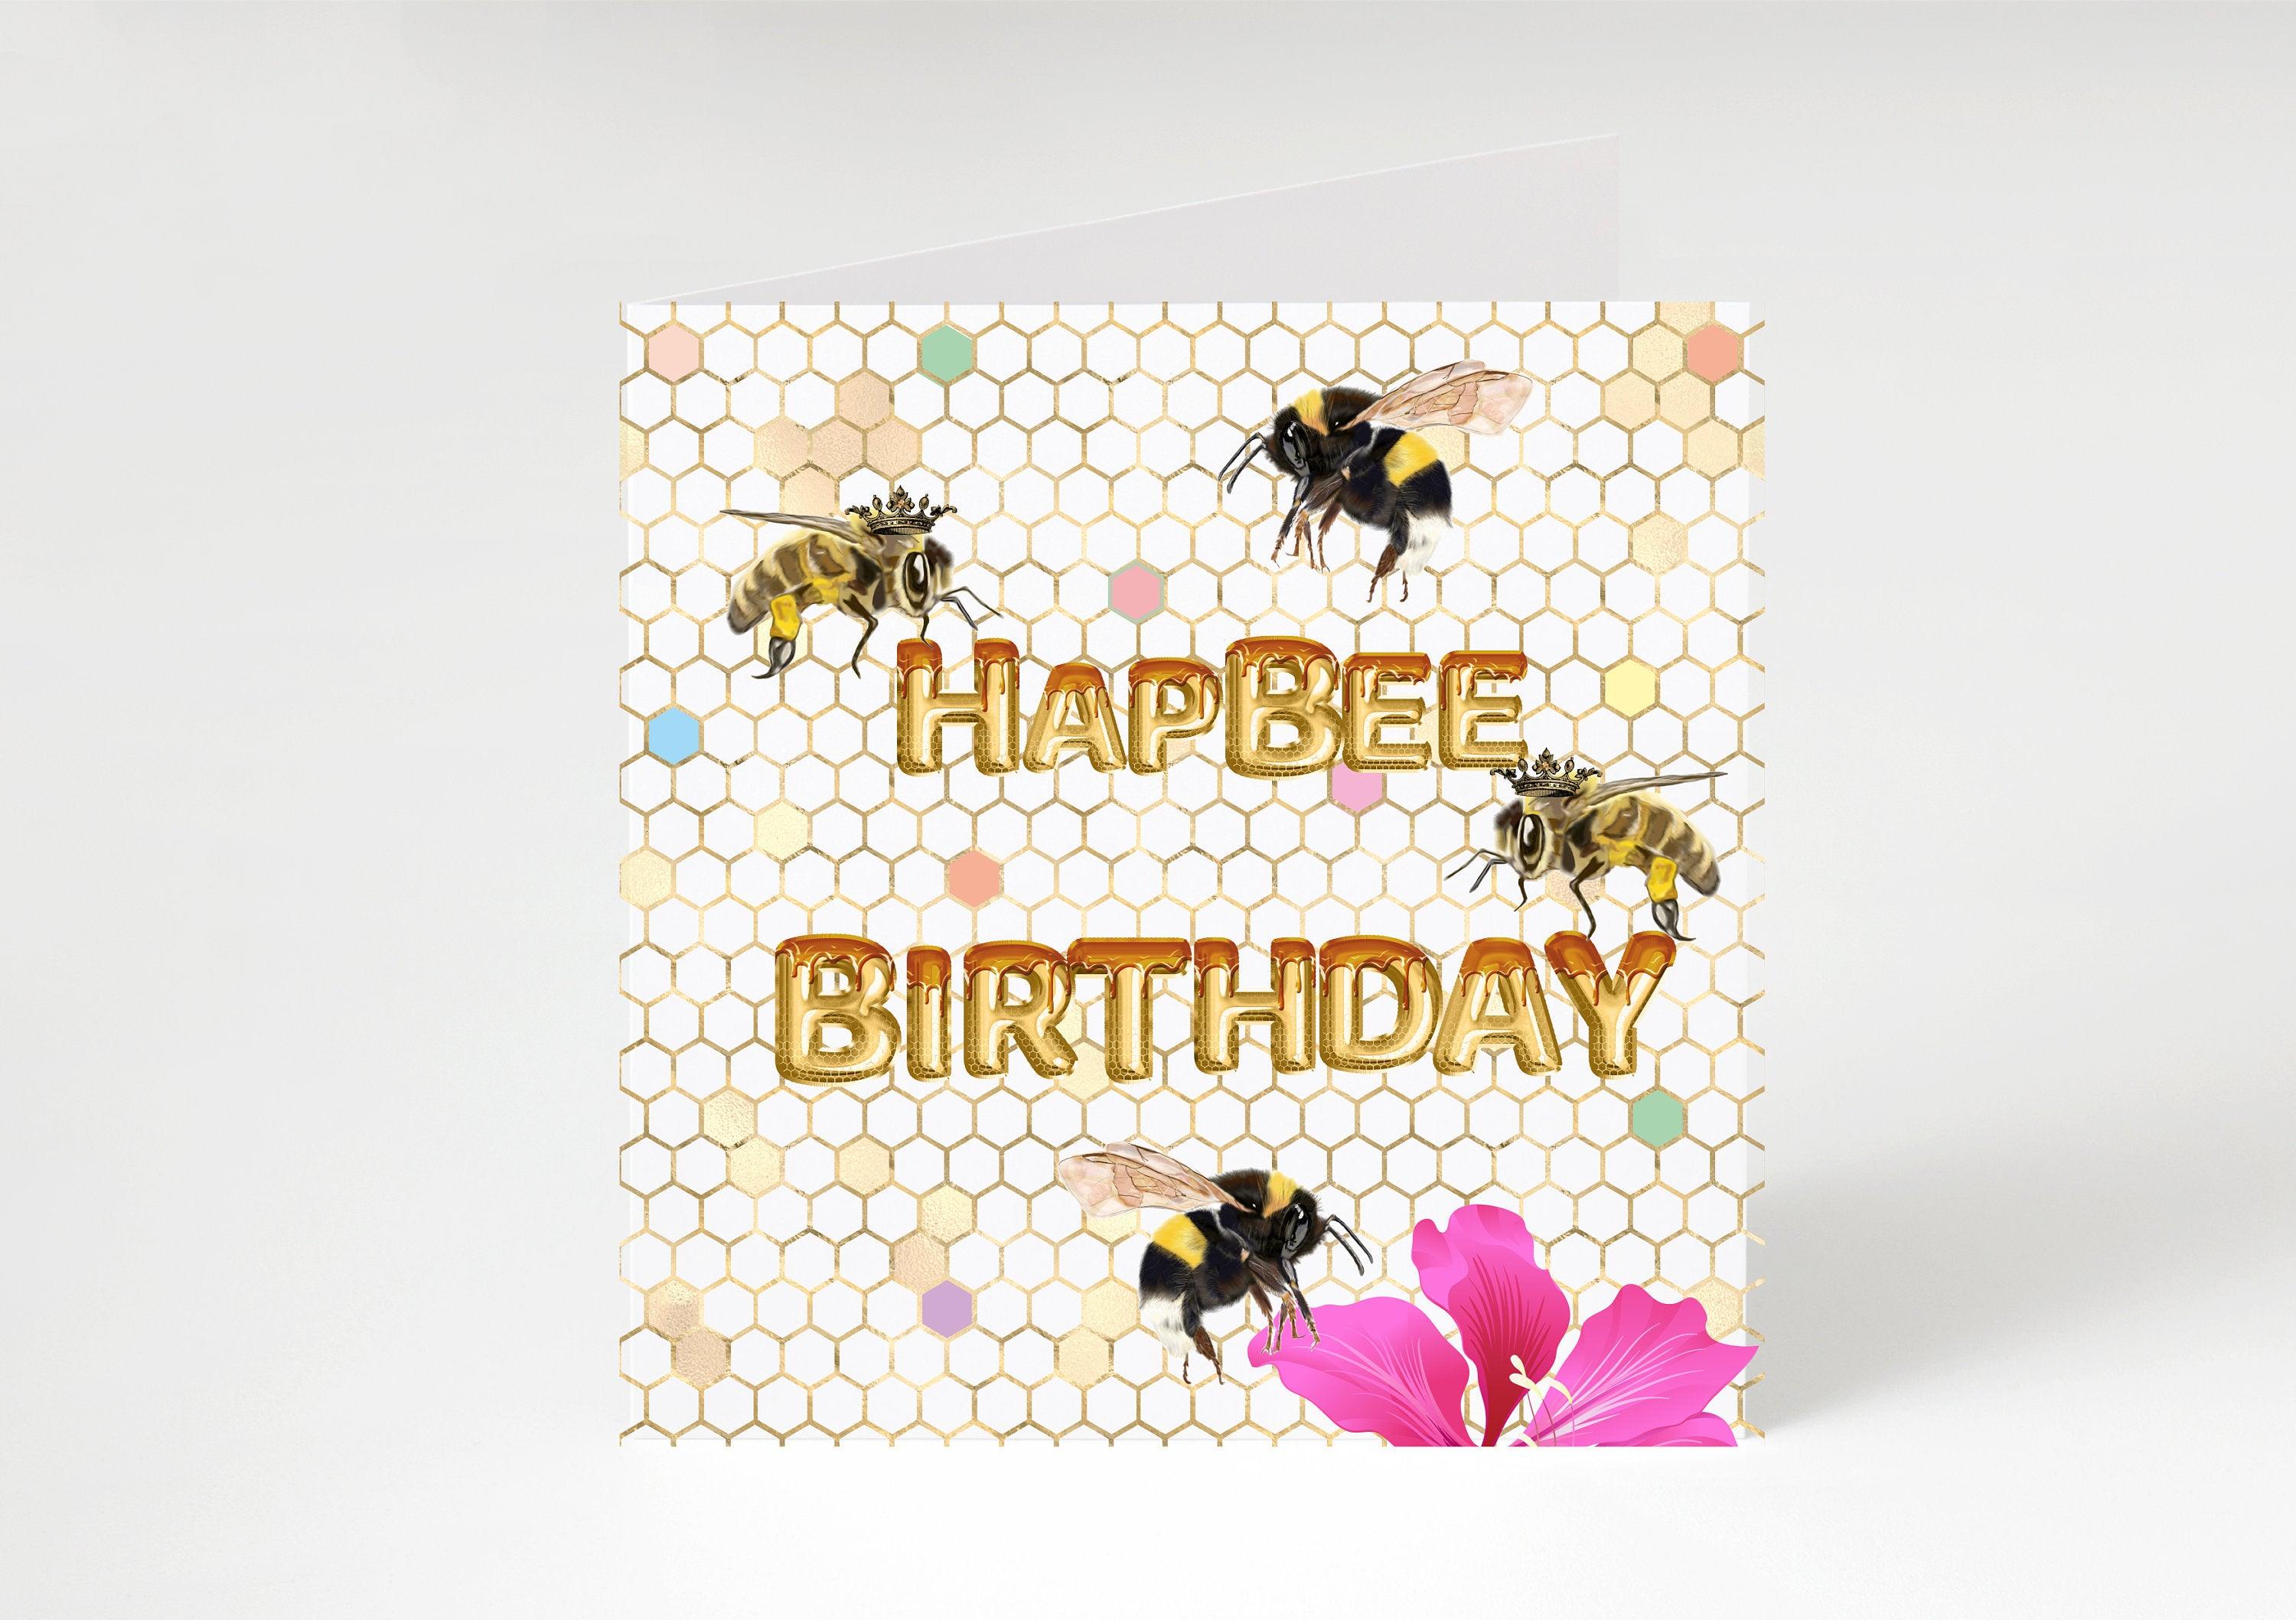 Hap-Bee Birthday -Bumblebee birthday card- Greetings card-Thankyou card-  female birthday-male birthday- honey bee-For Him-For Her- For them